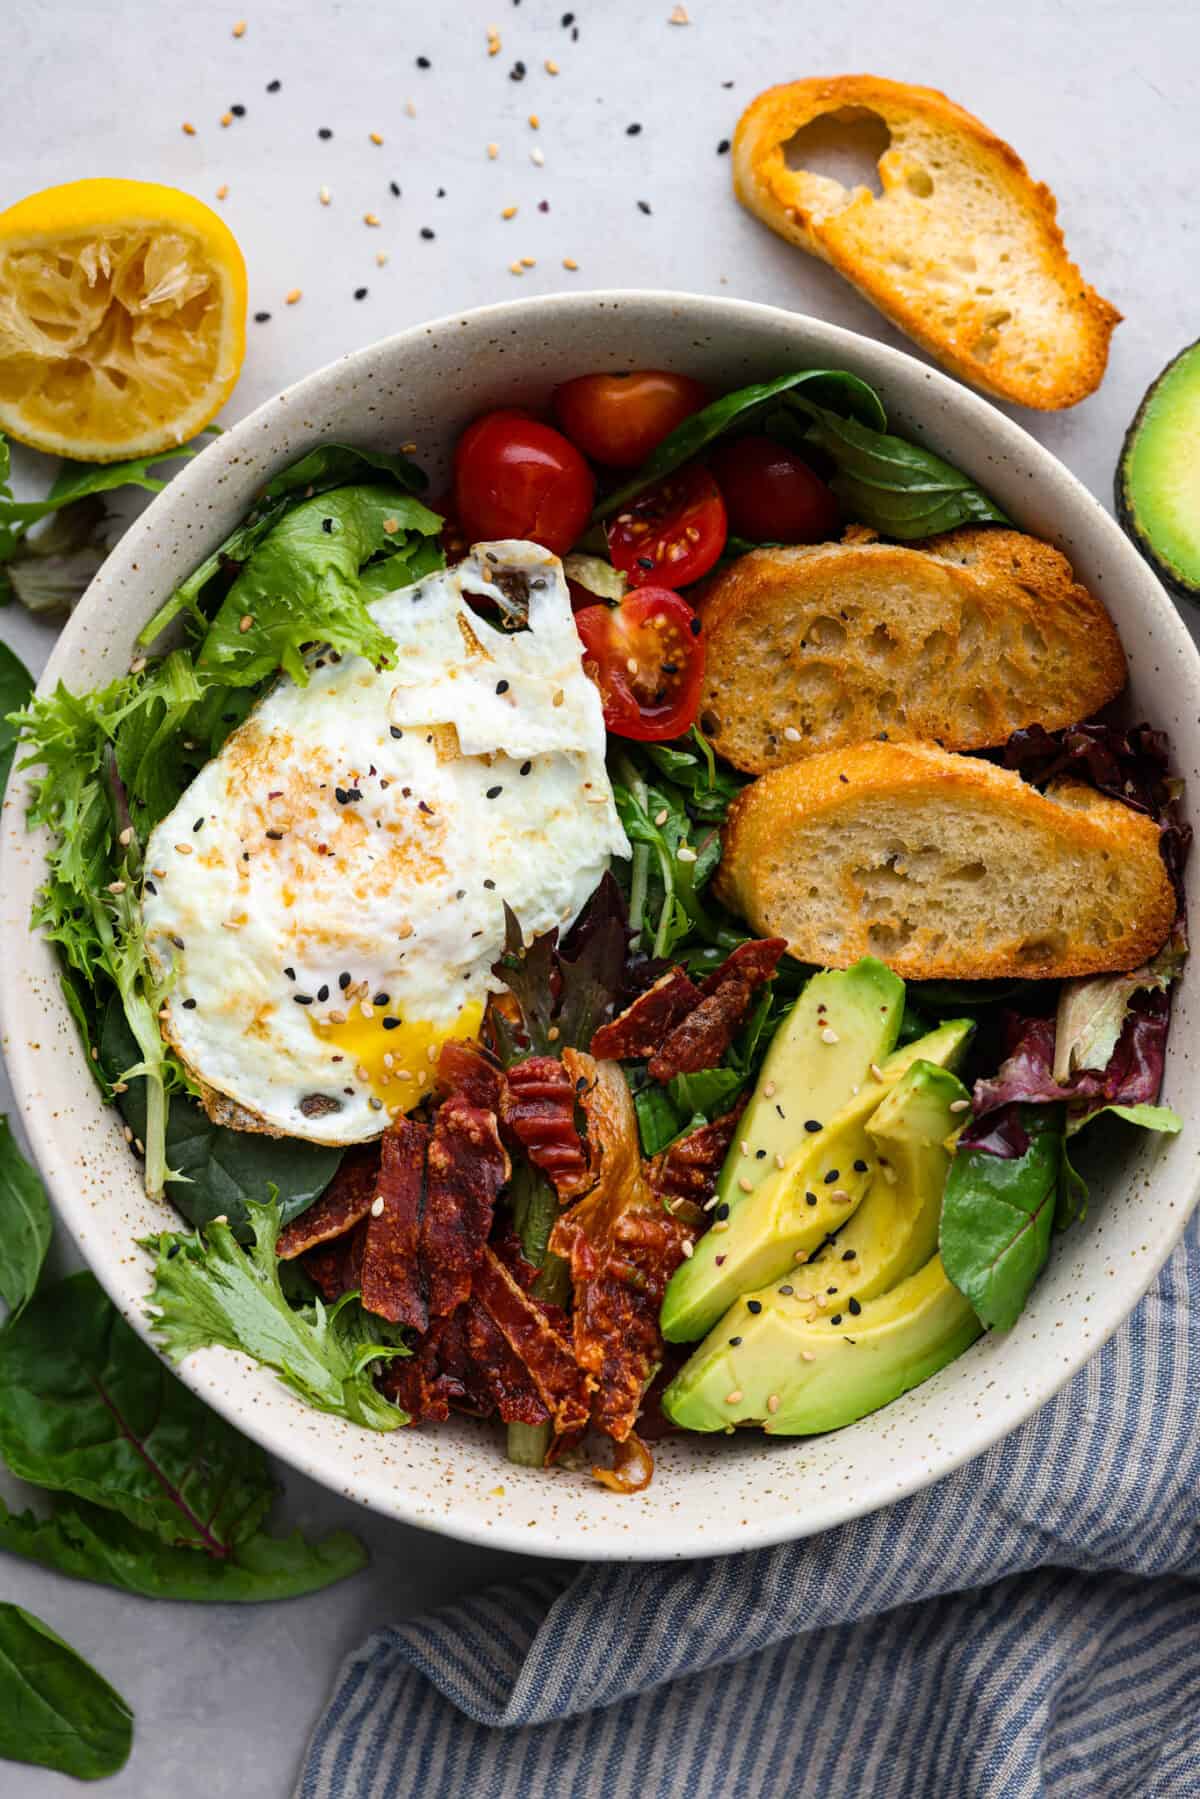 Top-down view of a salad topped with a fried egg, bacon, tomatoes, crostini, and sliced avocado.